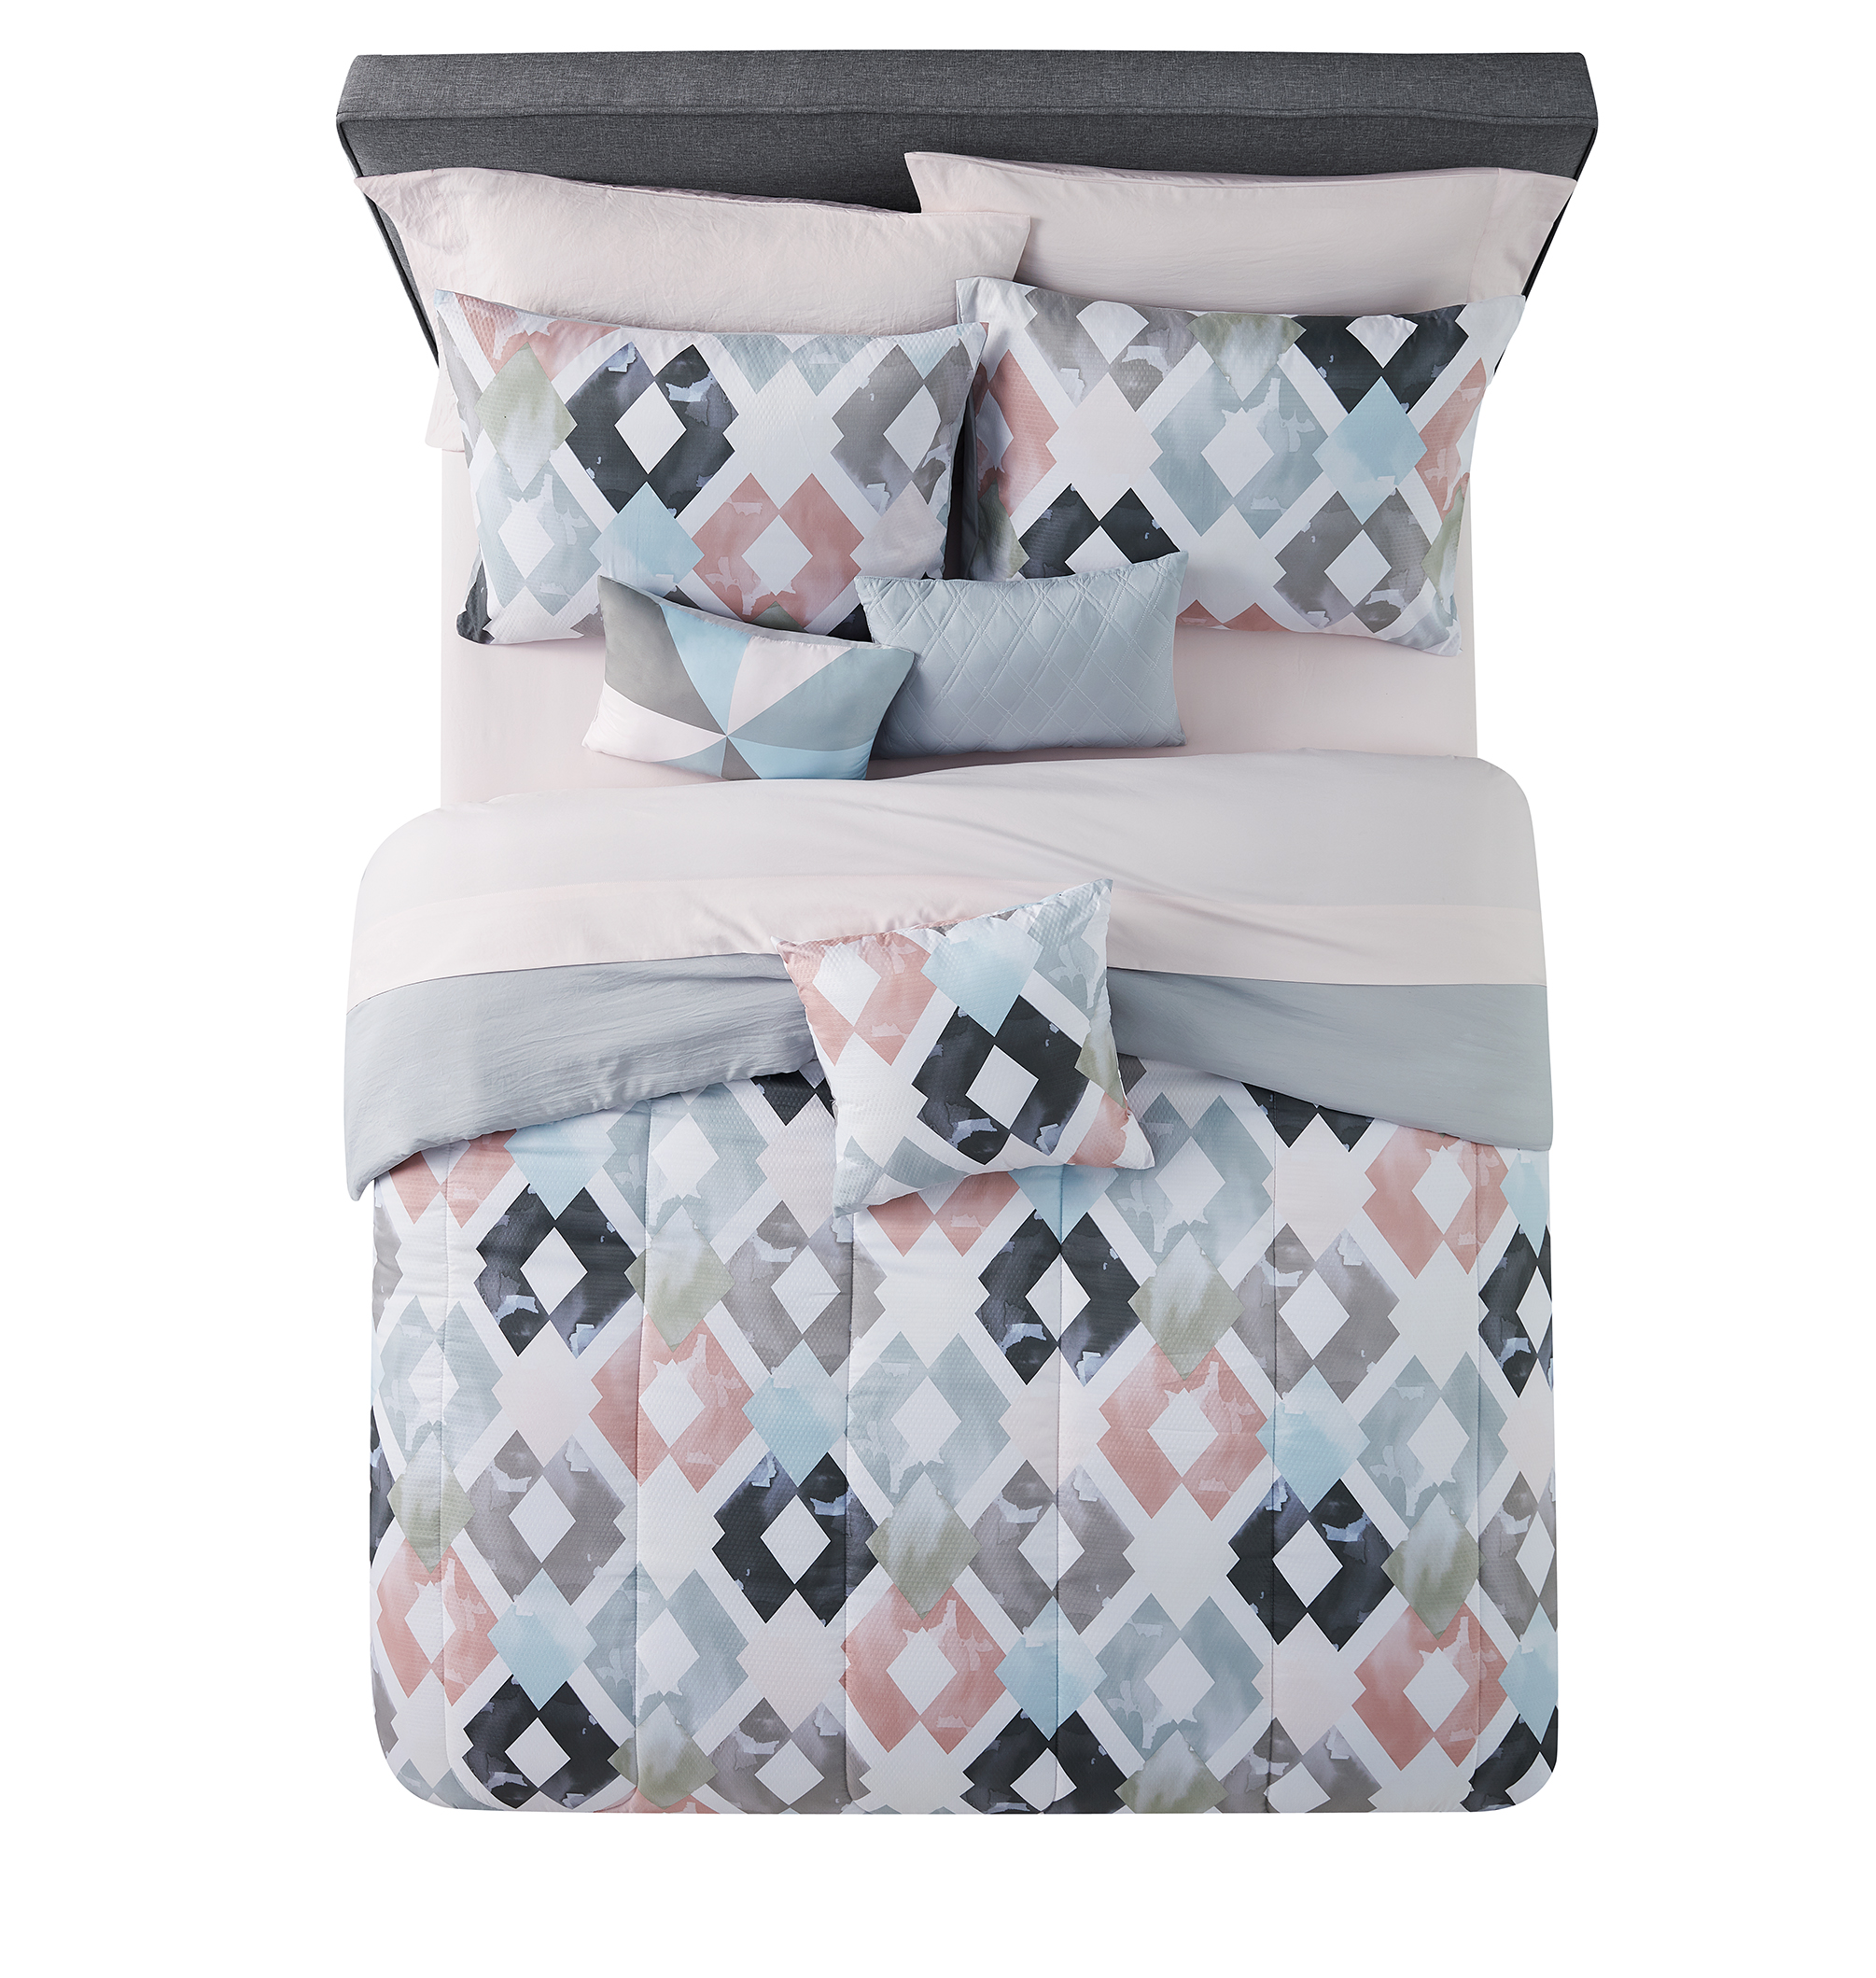 Mainstays Pink and Teal Diamond 10 Piece Bed in a Bag with 3 Dec Pillows, Full - image 5 of 7